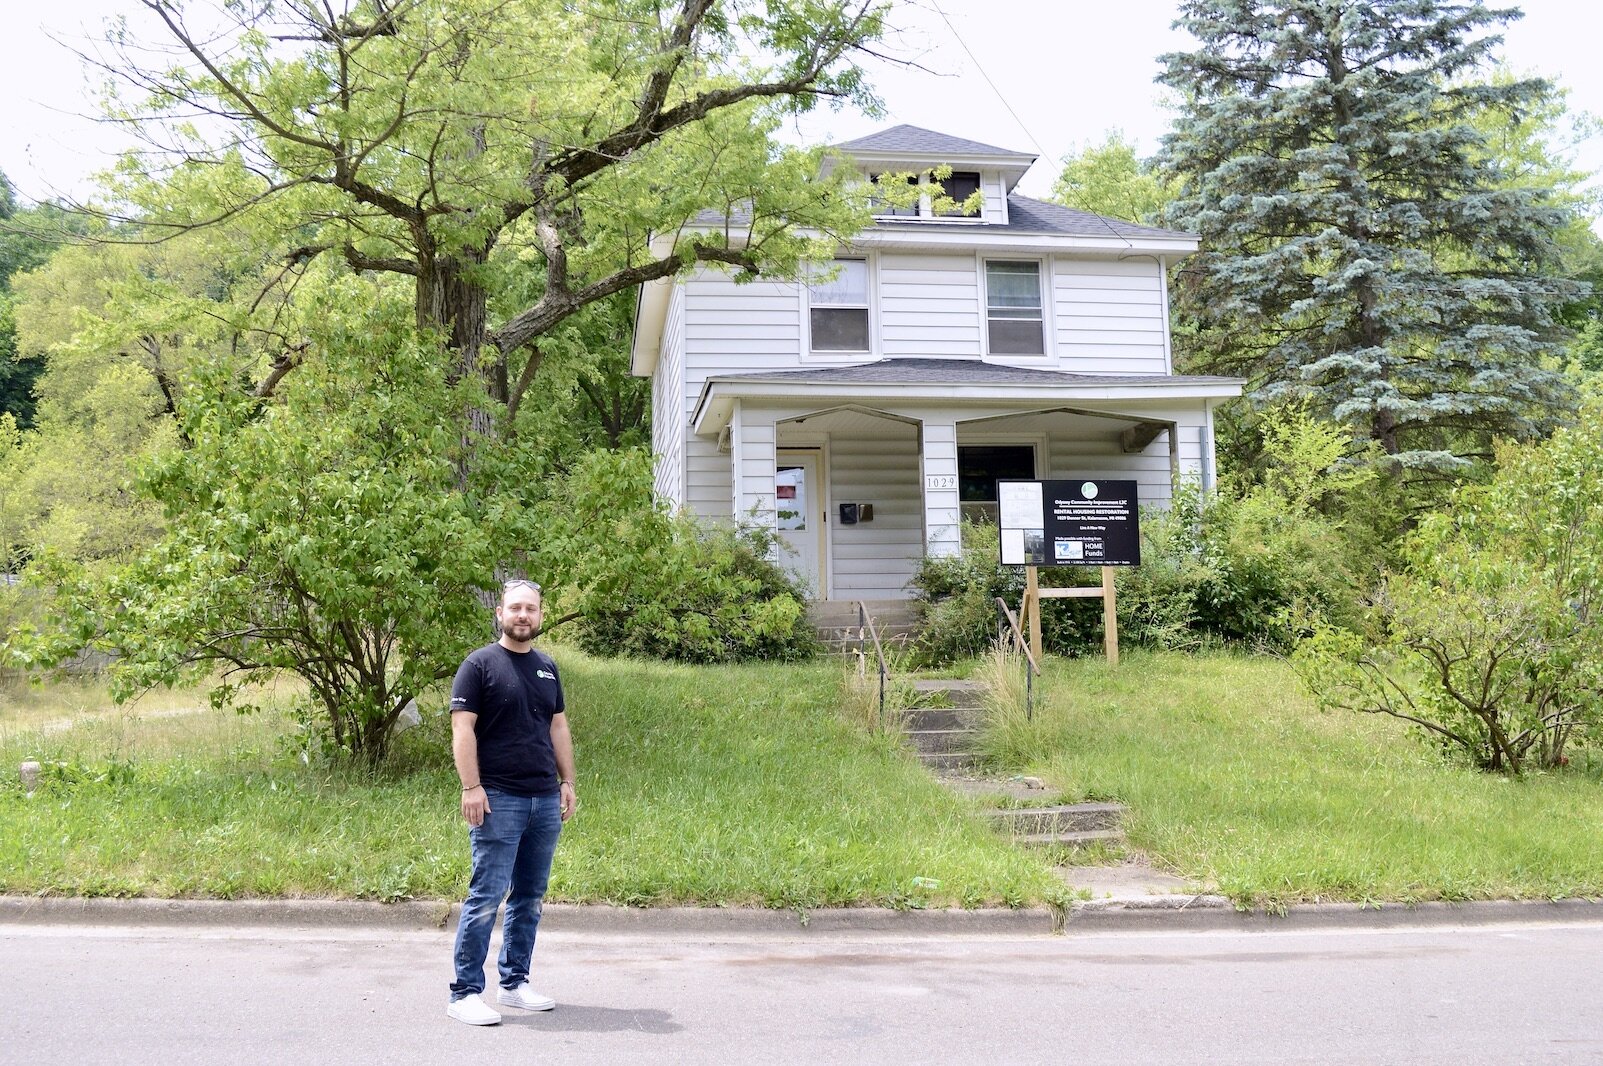 Another house on Denner is Jake Tardani's next project. It had been used as a drug-selling operation. West Douglas has had a bad reputation, but now "it's a good neighborhood. It's safe, it's secure," he says.